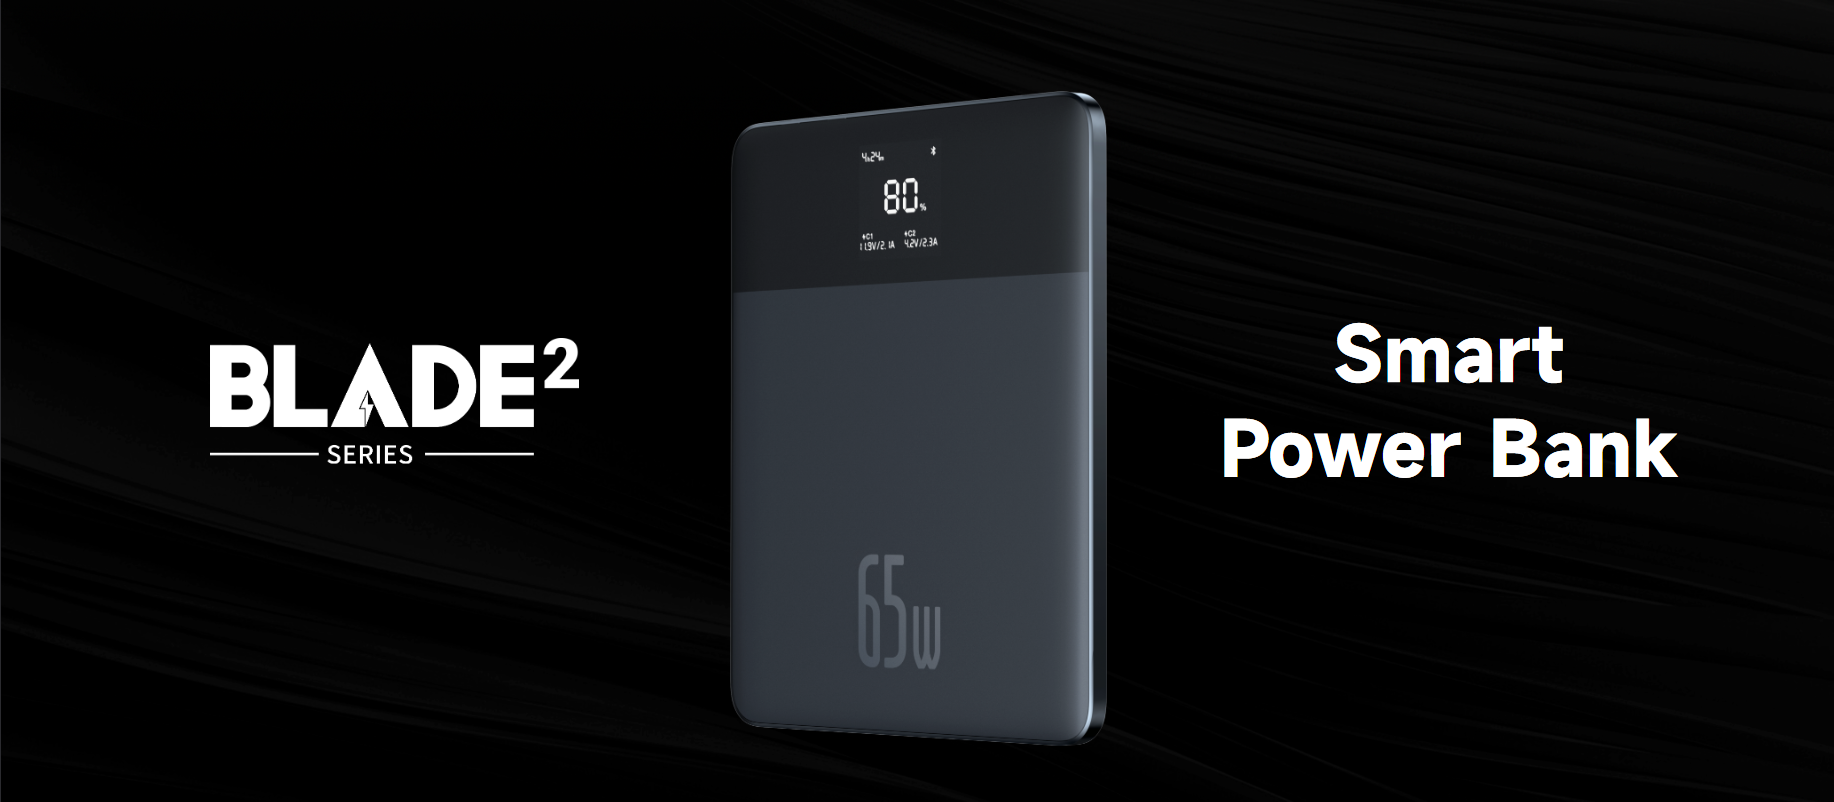 Baseus Blade2 Smart Power Bank upgrades to 140W charging and new colorways  -  News